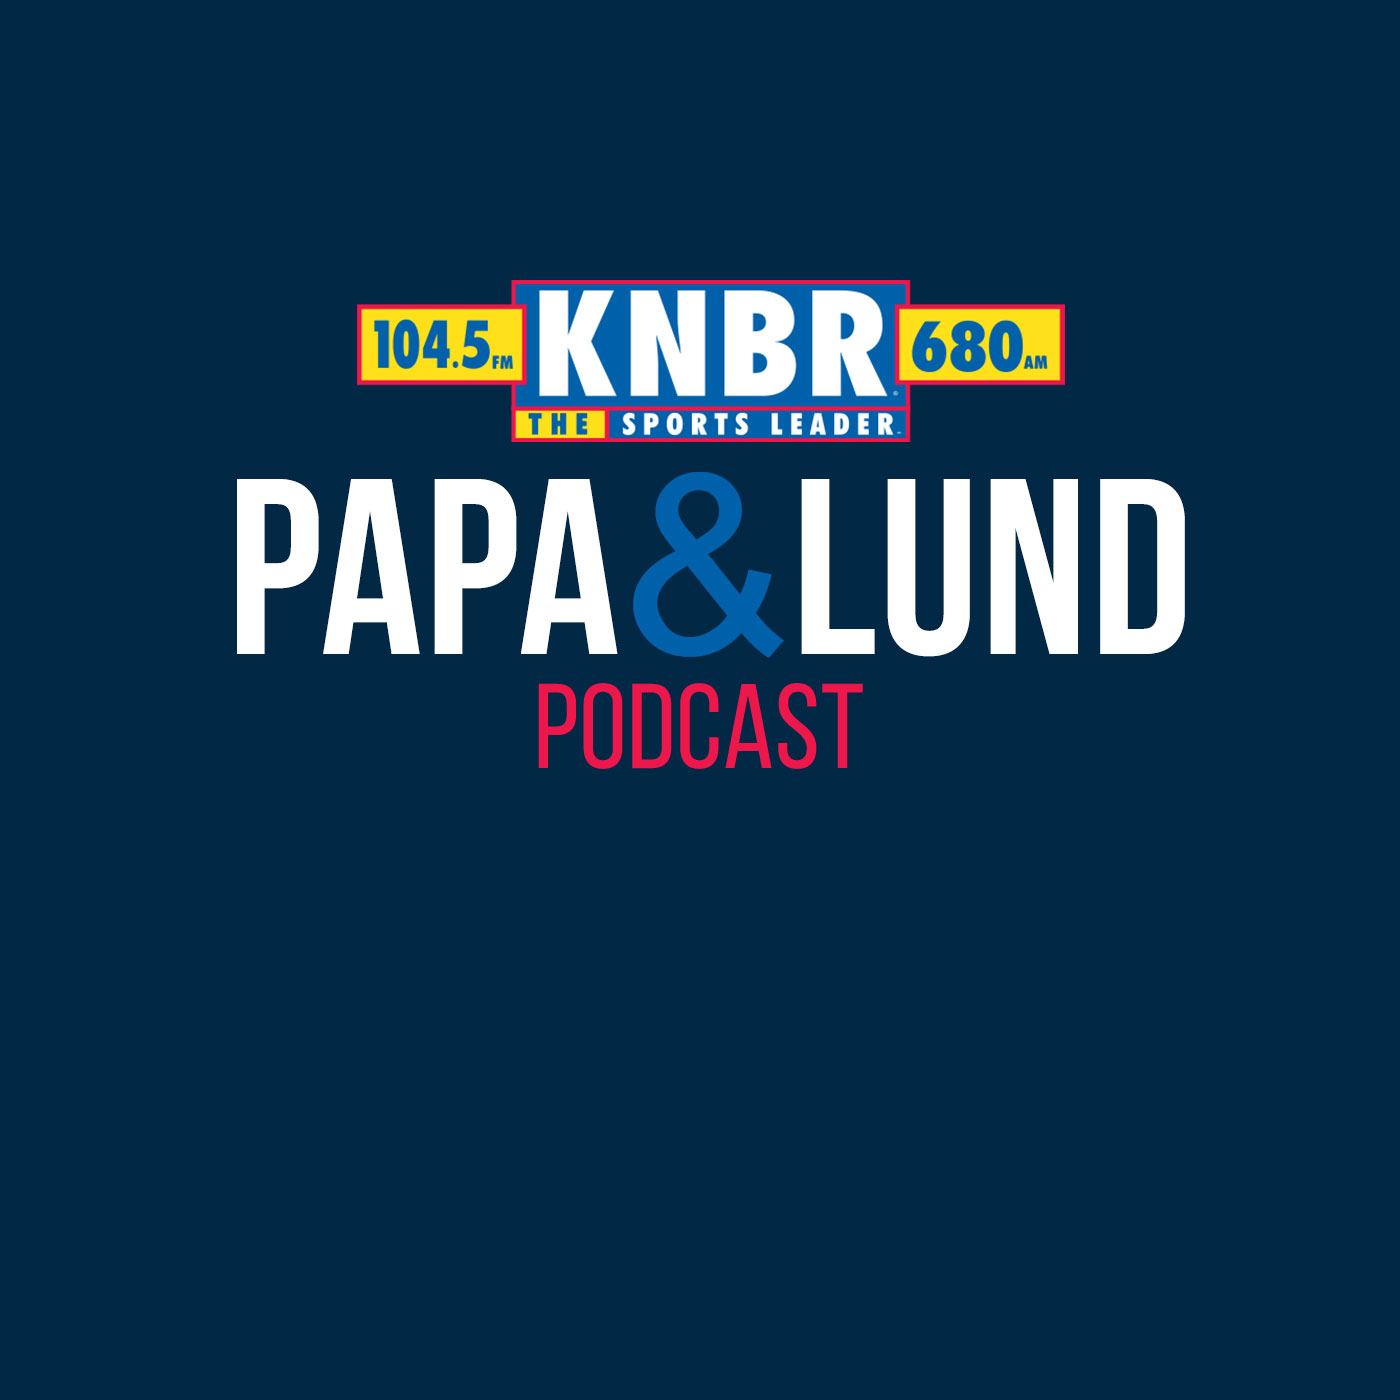 11-14 Papa & Lund break down Brock Purdy's QB ability after playing his first 17 games and why he is in the Top Tier in the NFL